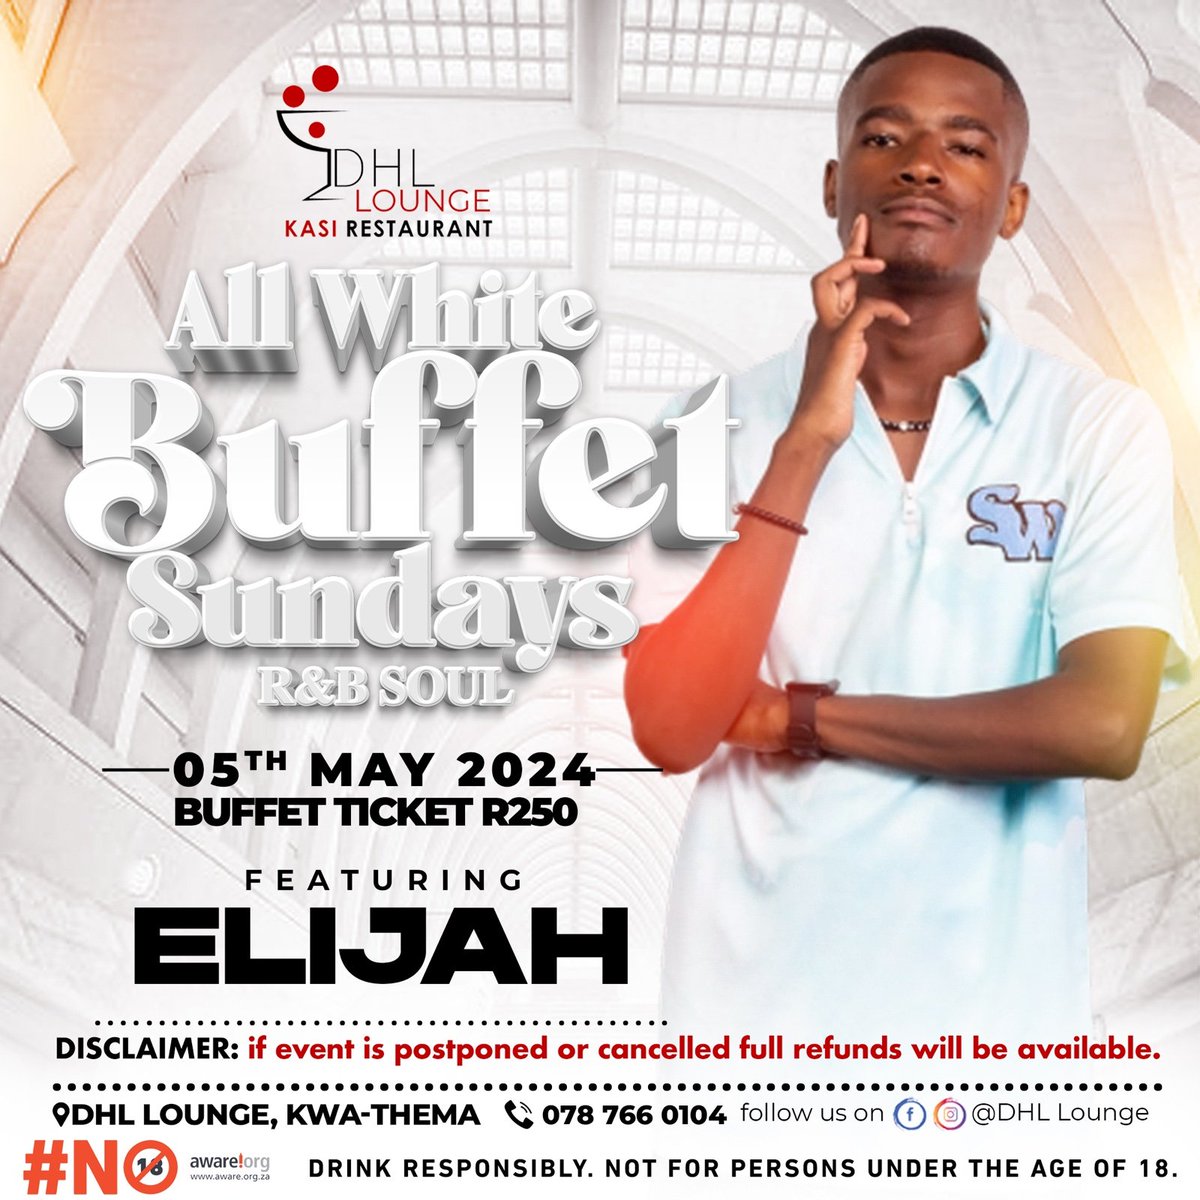 It's @NEWSCAFEEMPEROR Friday  WHAT IS AFRO - Barbeque Assembly then #BuffetSundays - @DHLLOUNGE on Sunday

#2024Tour #ElijahSeason #WeekendSpithiphithi